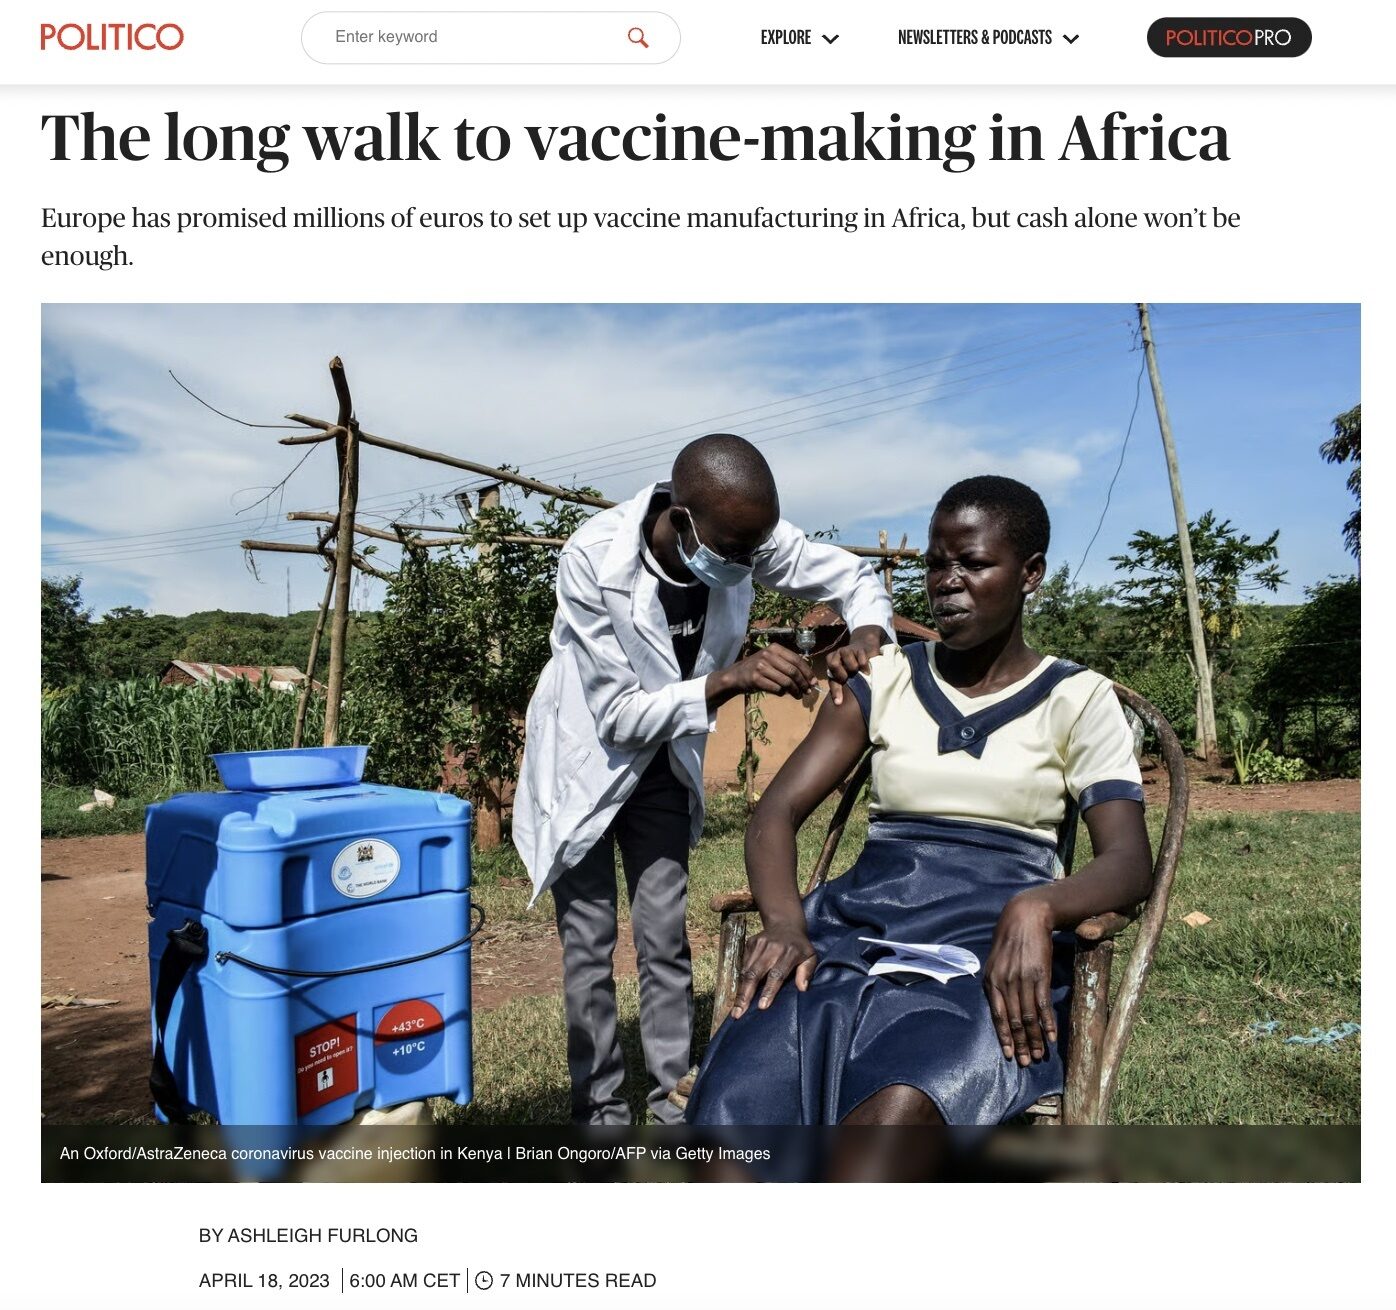 Screenshot des Politico Artikels “The long walk to vaccine-making in Africa”